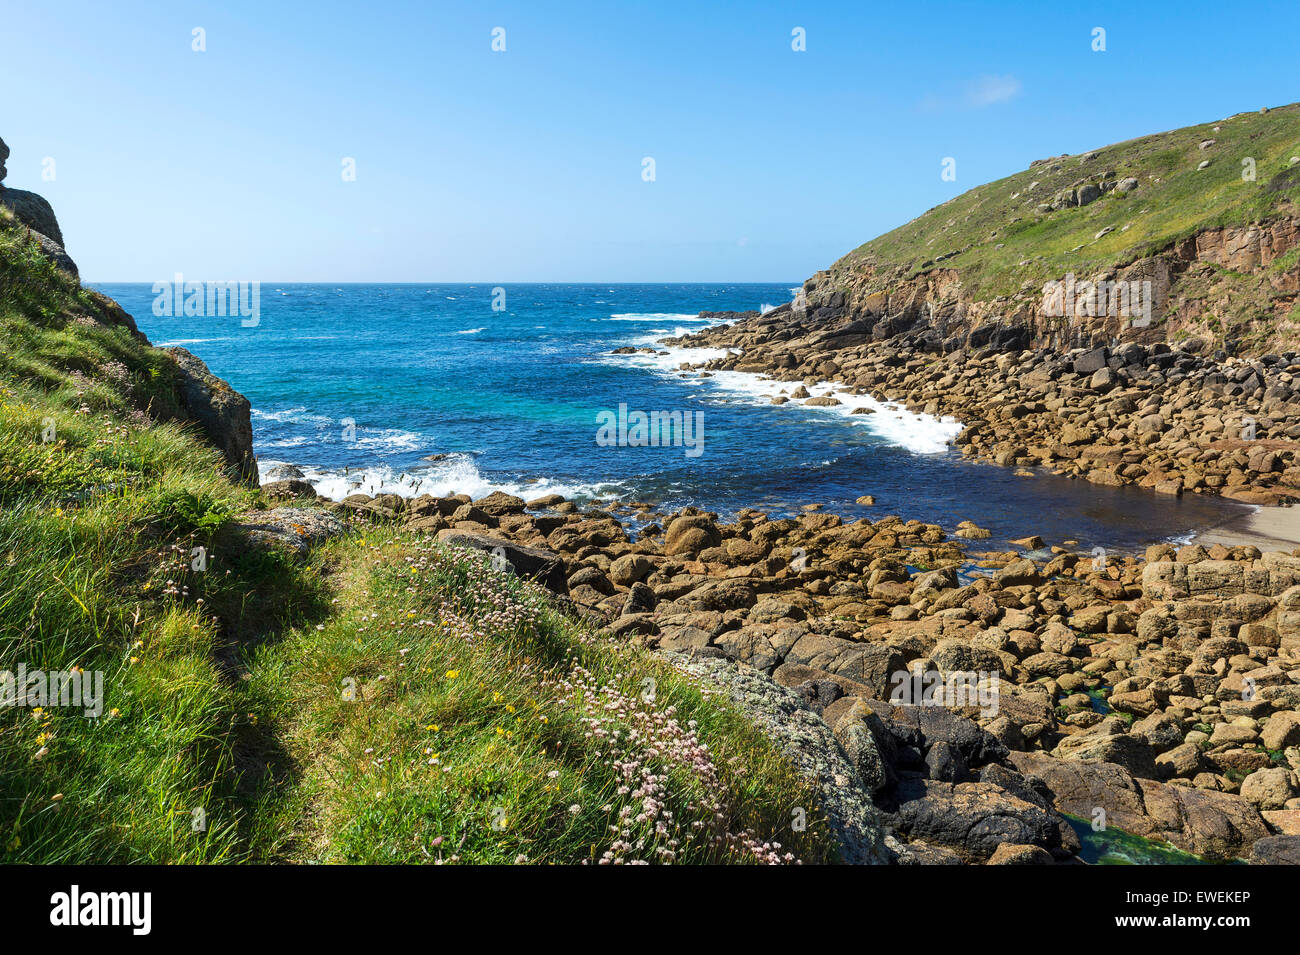 The secluded beach at Porthgwarra cove in Cornwall, England, UK Stock Photo